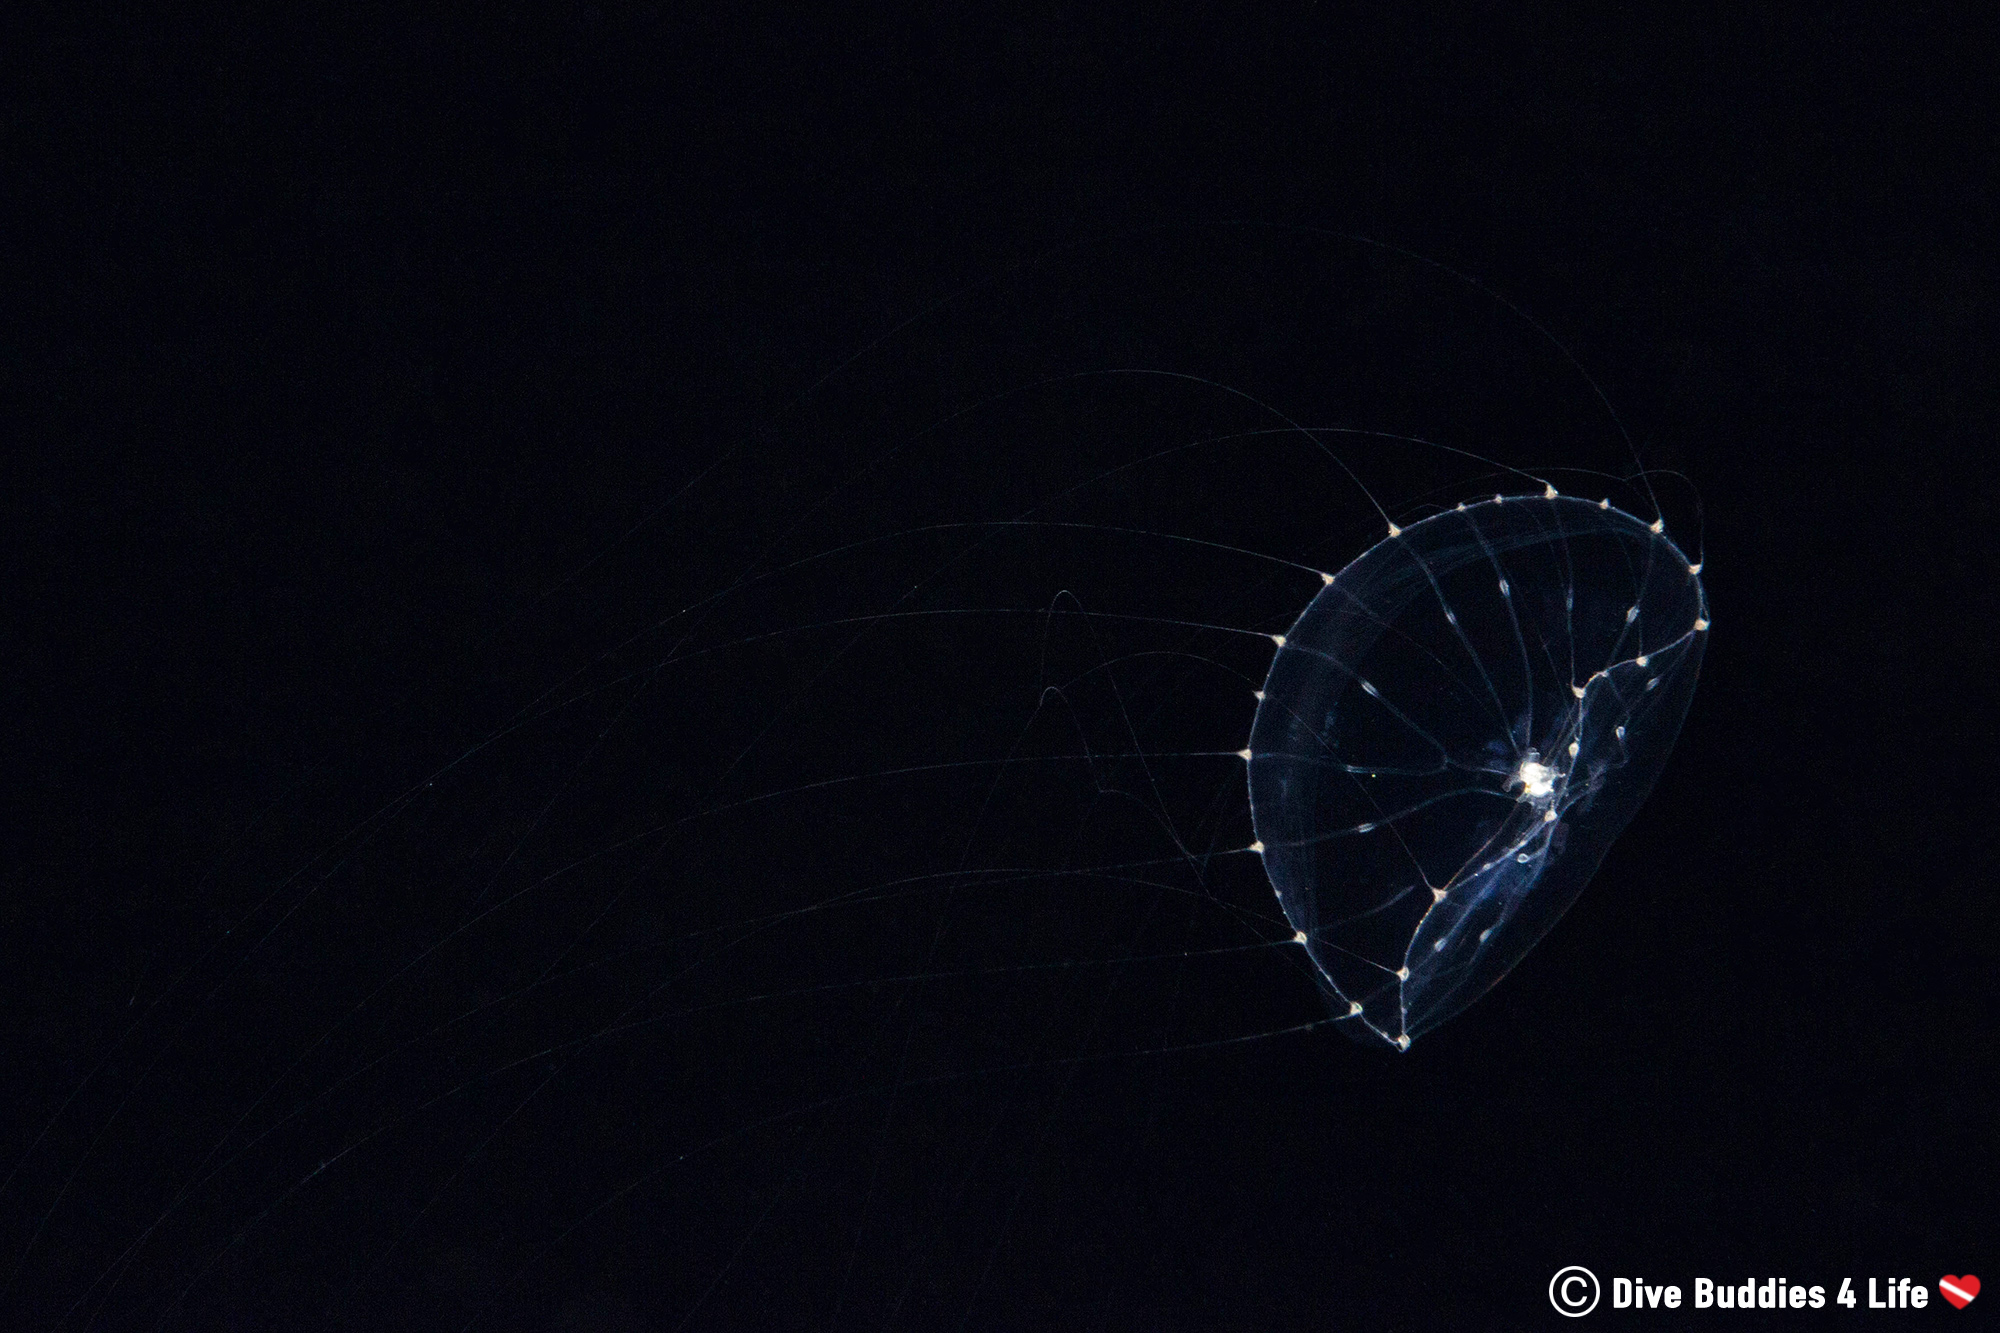 A Translucent Jelly Fish In The Black Water Of West Palm Beach, Florida, USA